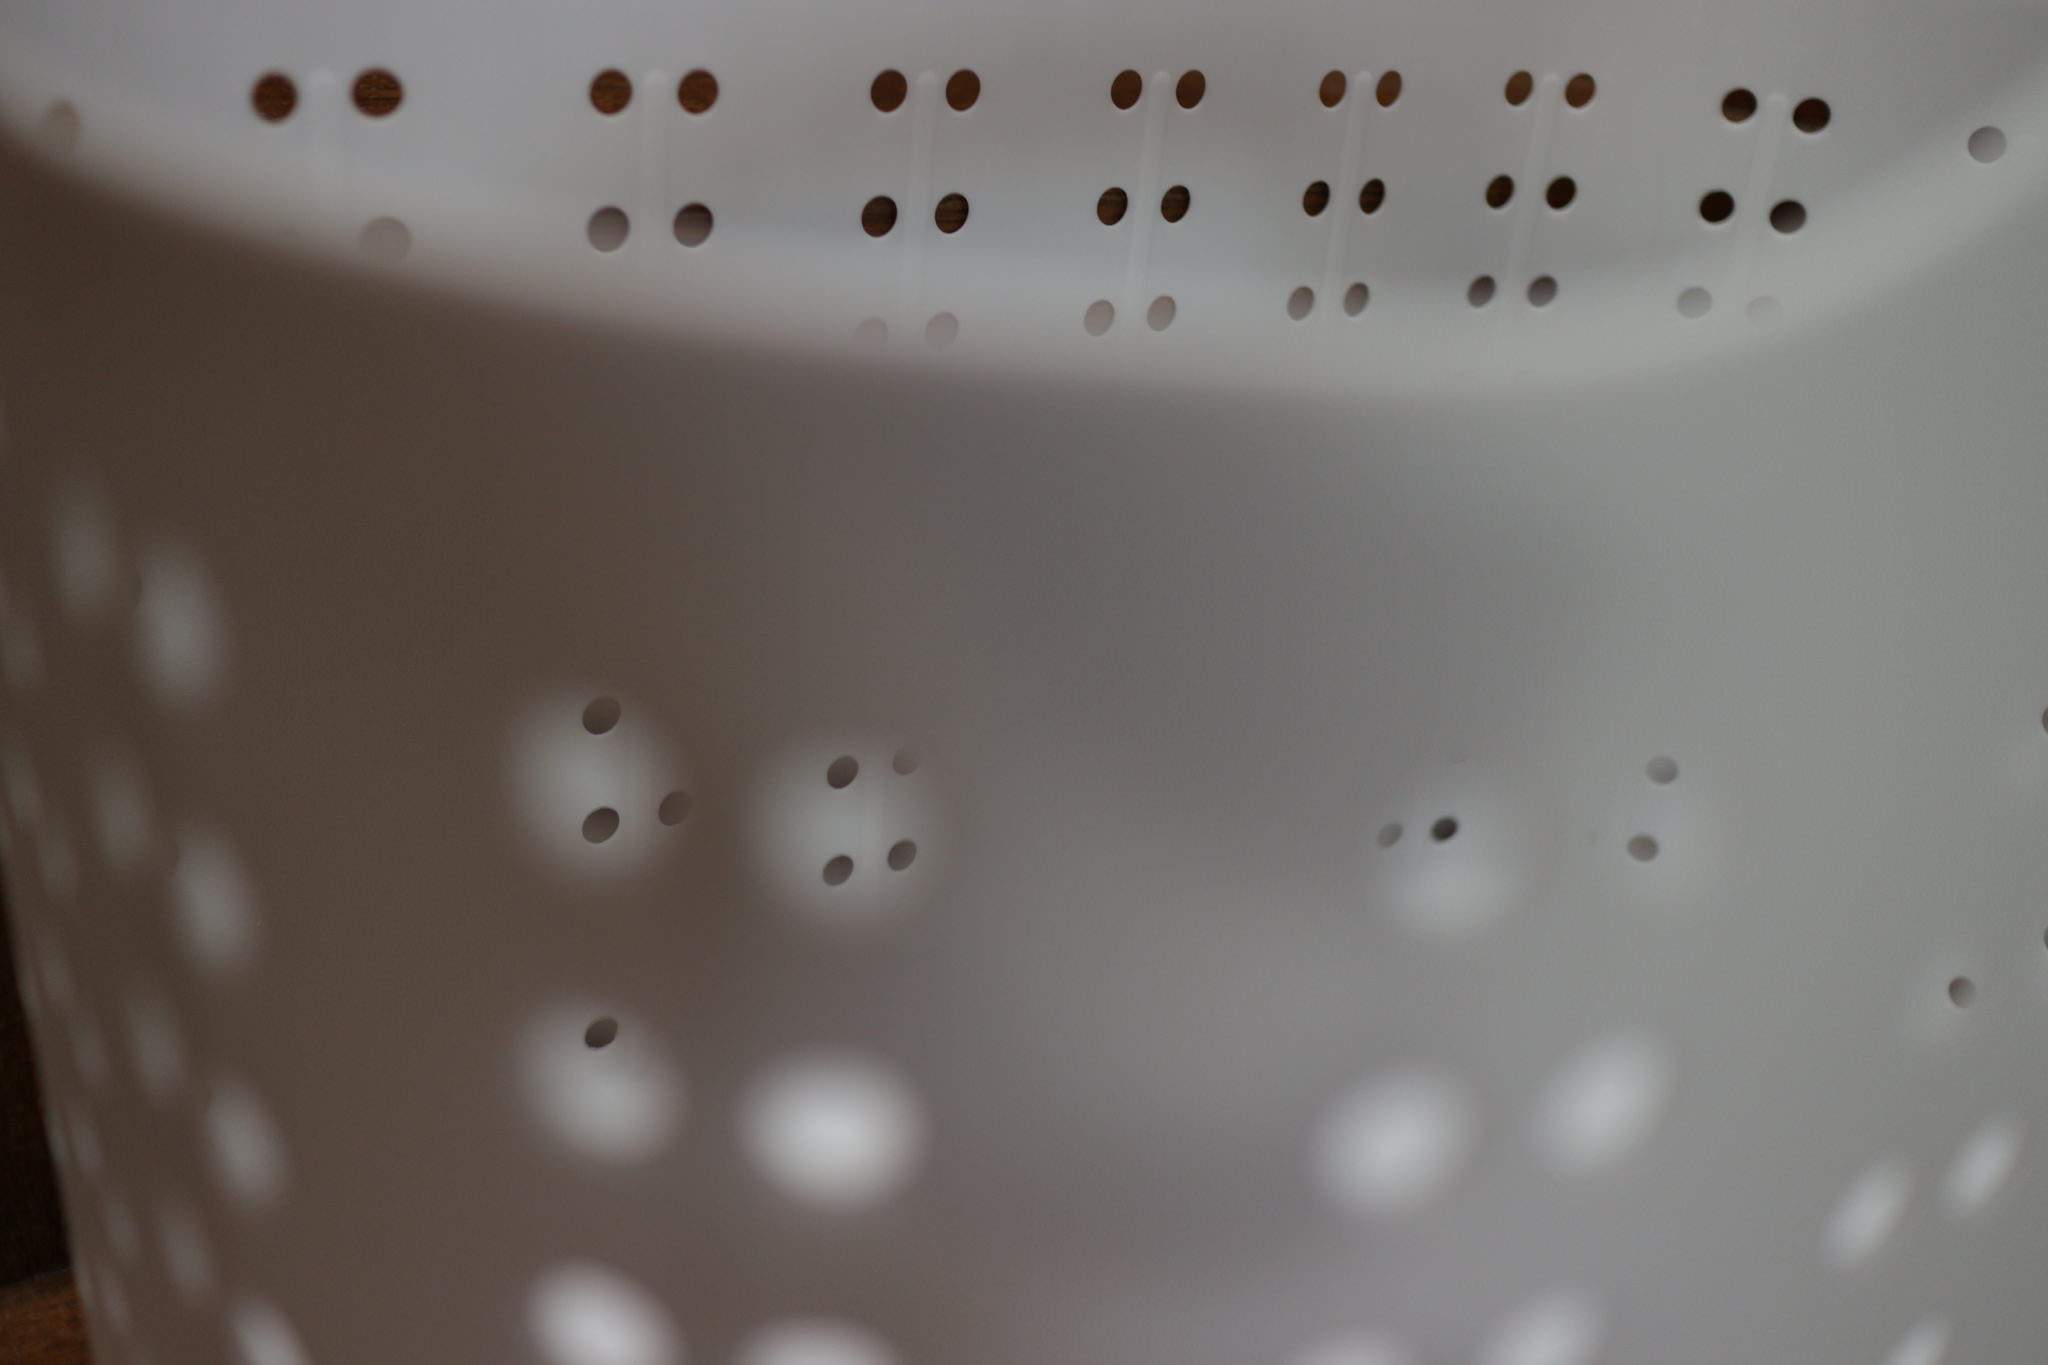 a close-up image of a laundry basket